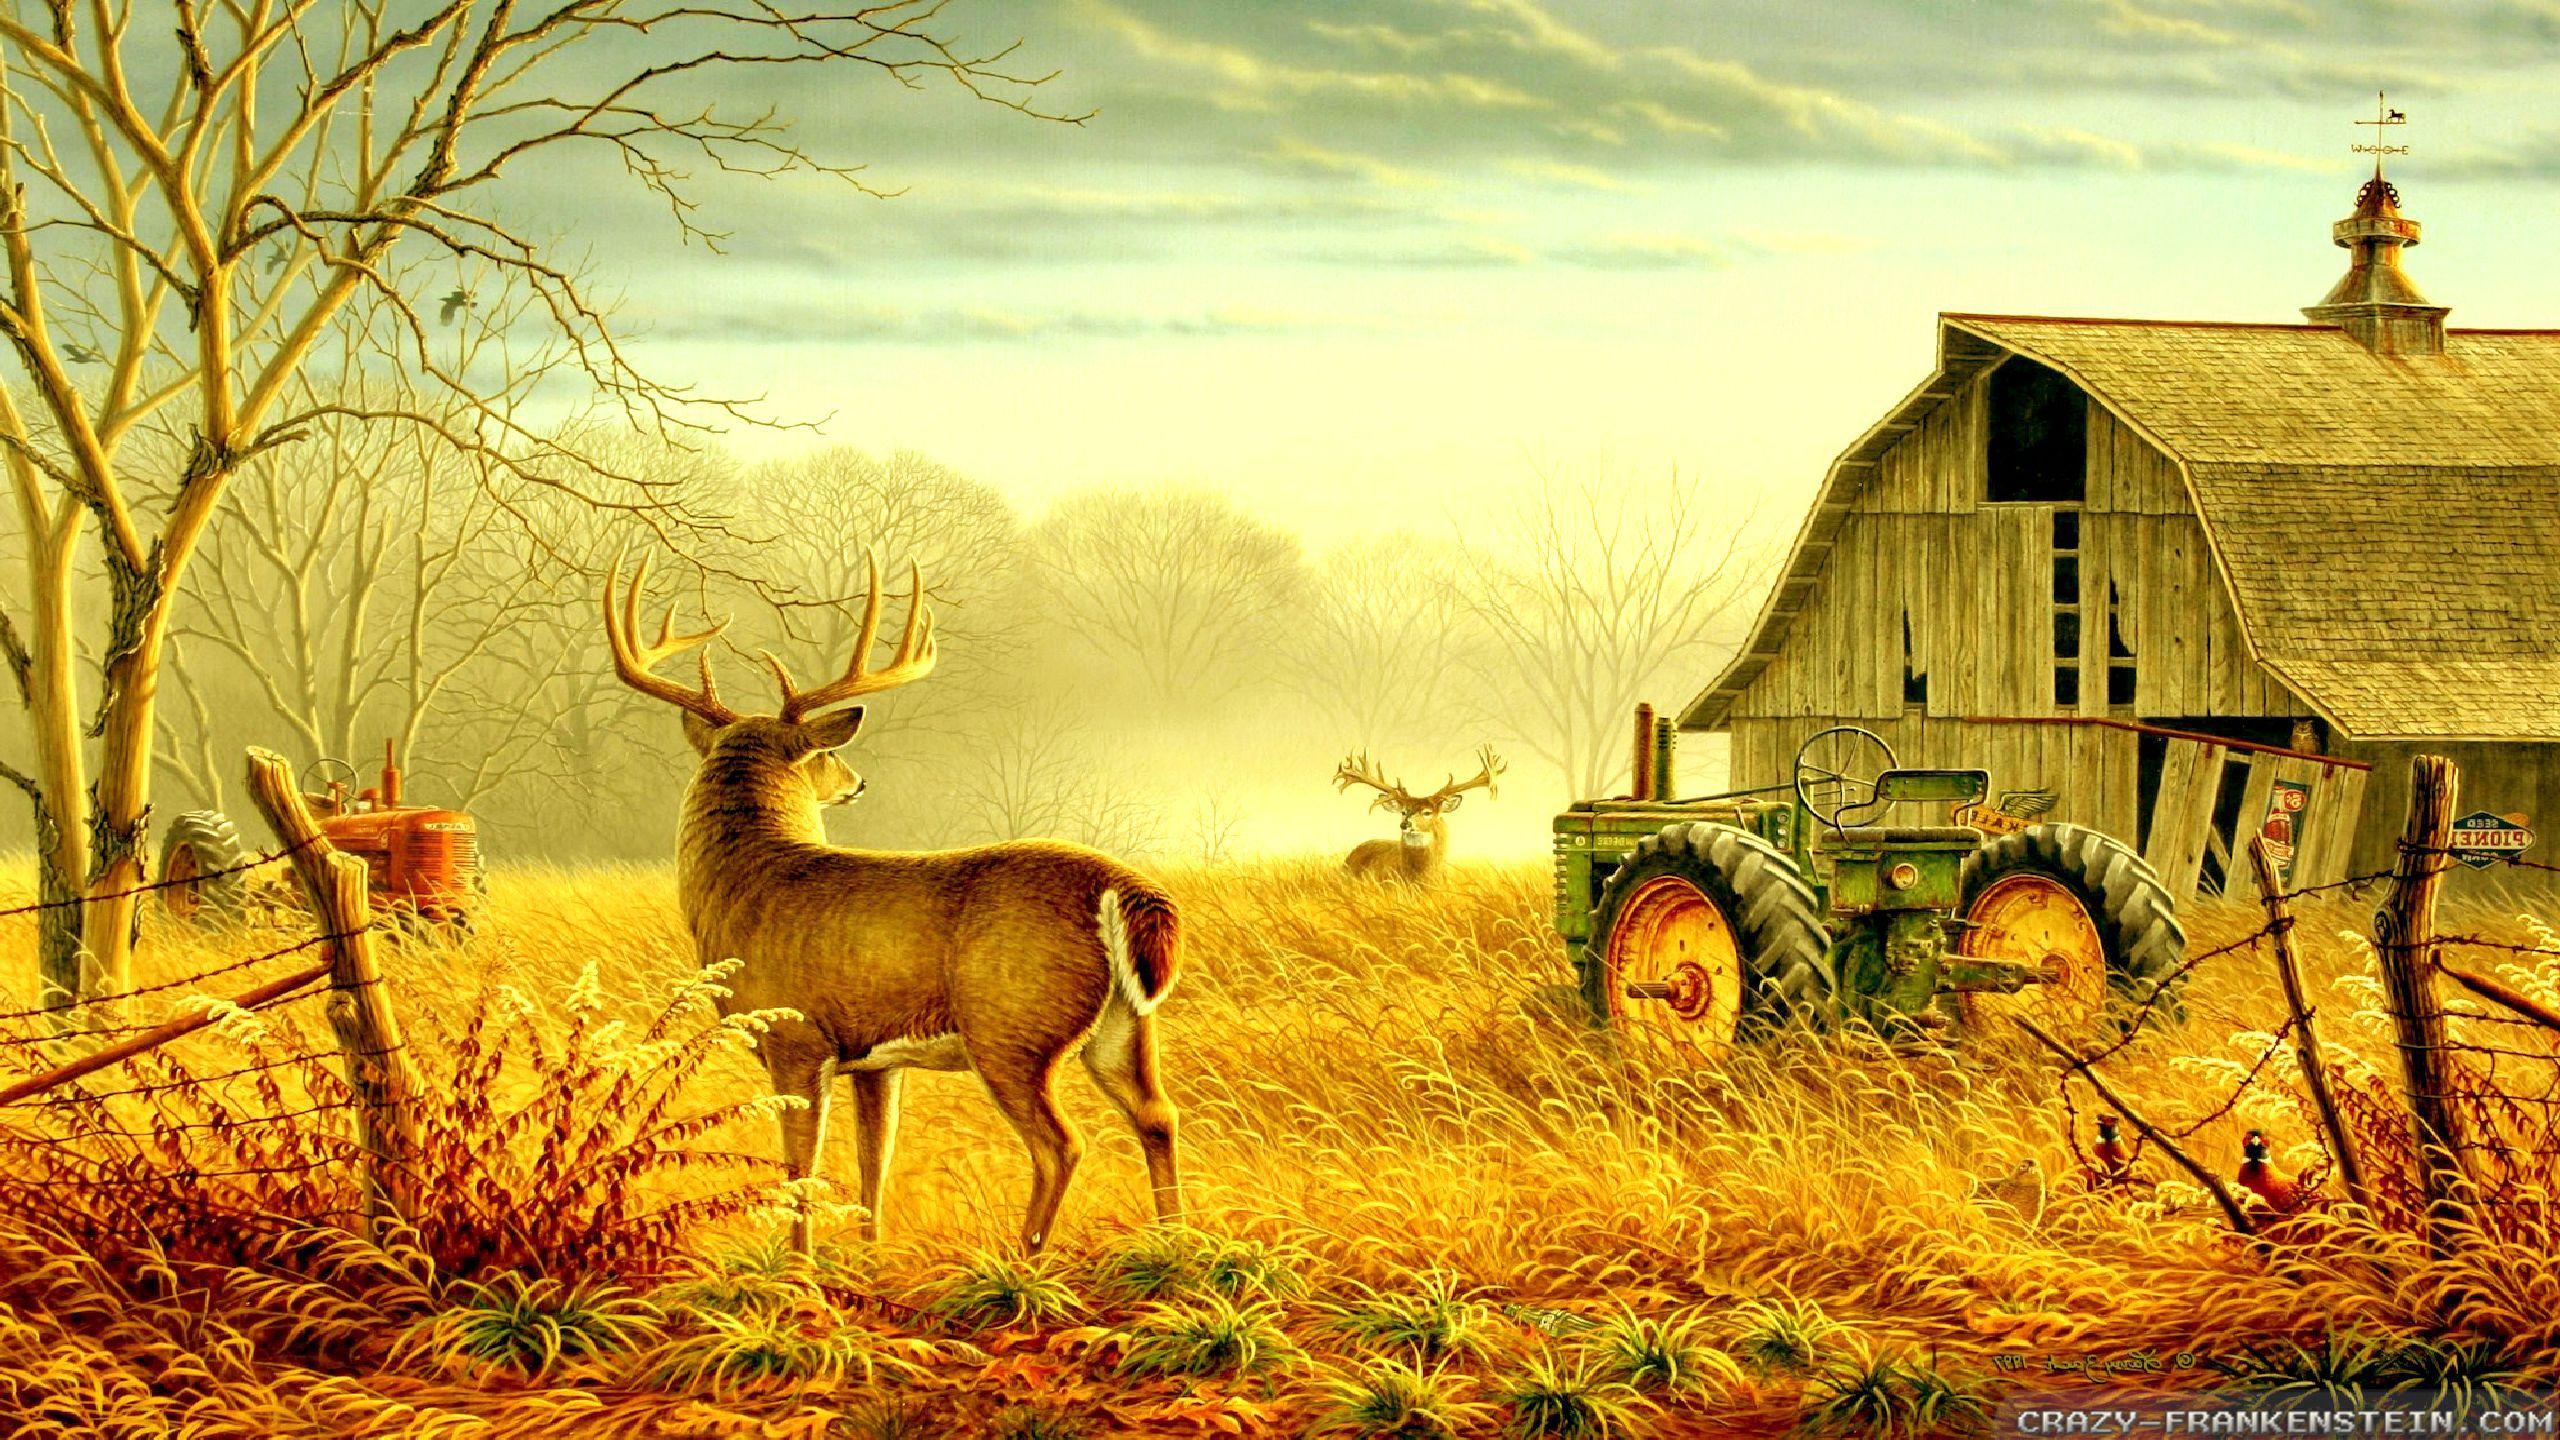 Country wallpaper Gallery. Beautiful and Interesting Image, Vectors